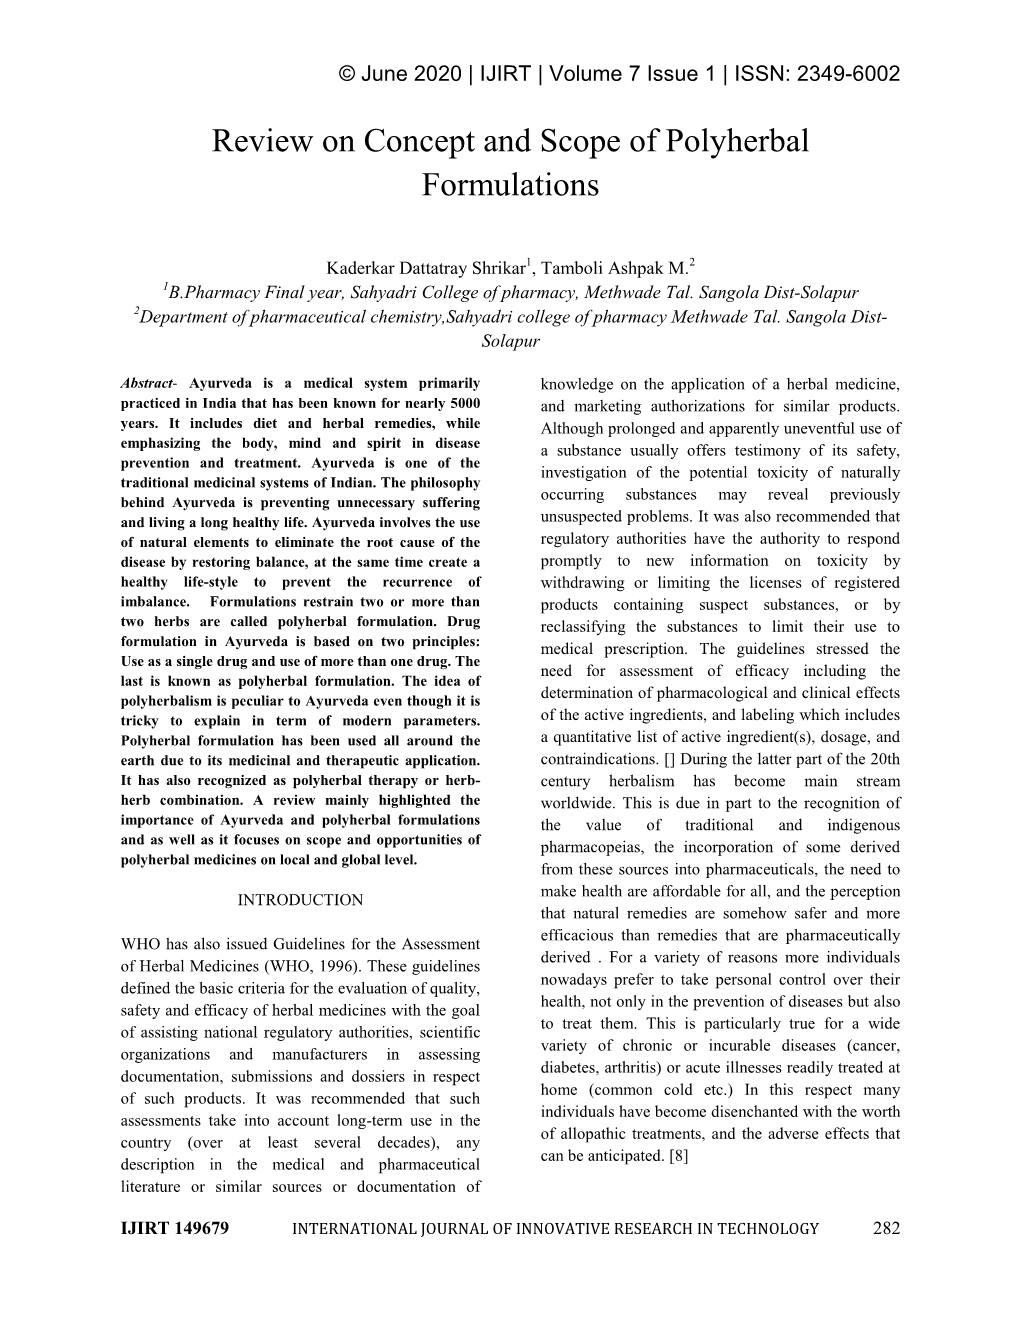 Review on Concept and Scope of Polyherbal Formulations